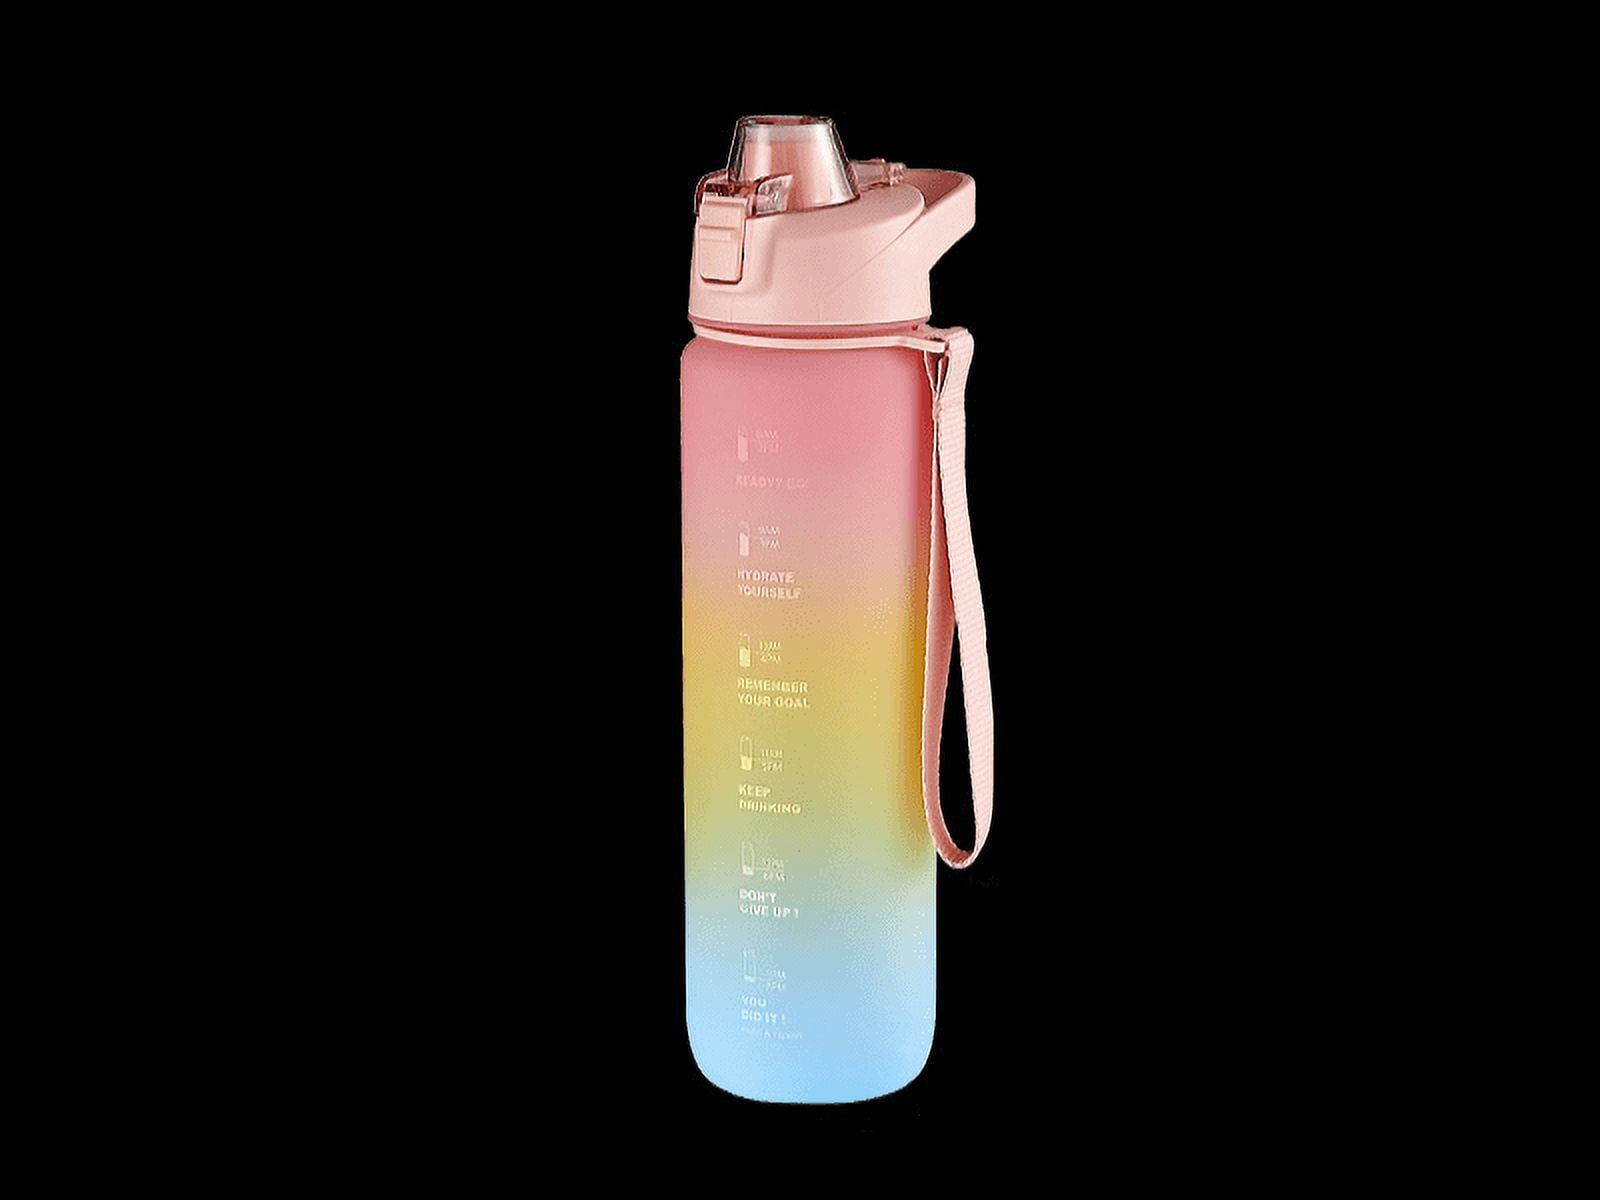 Insulated Water Bottle  Reusable Water Bottle – The Clean Hydration Company